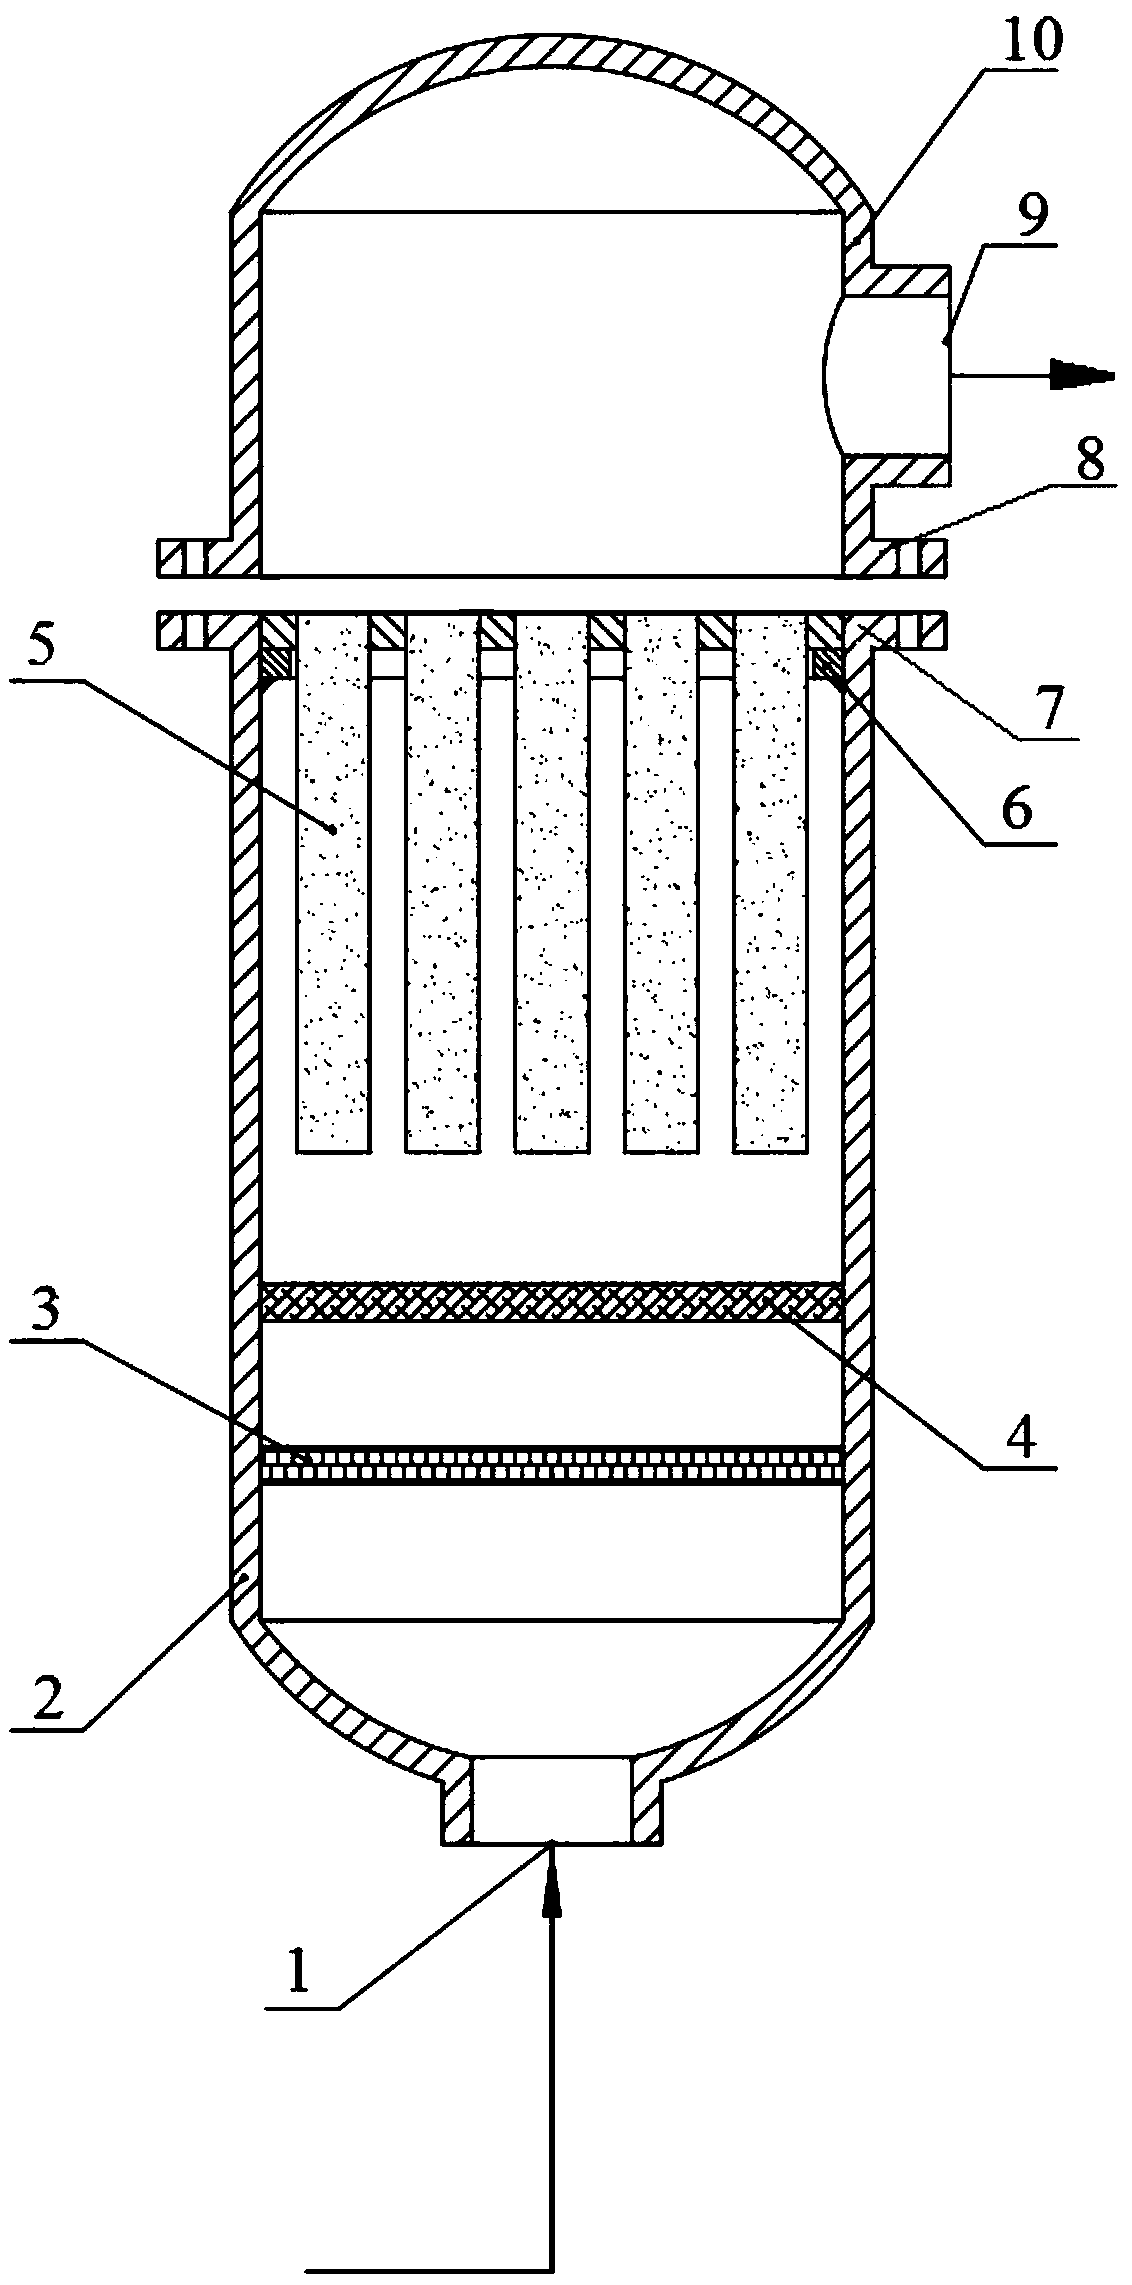 Hydrogen isotope purification filter